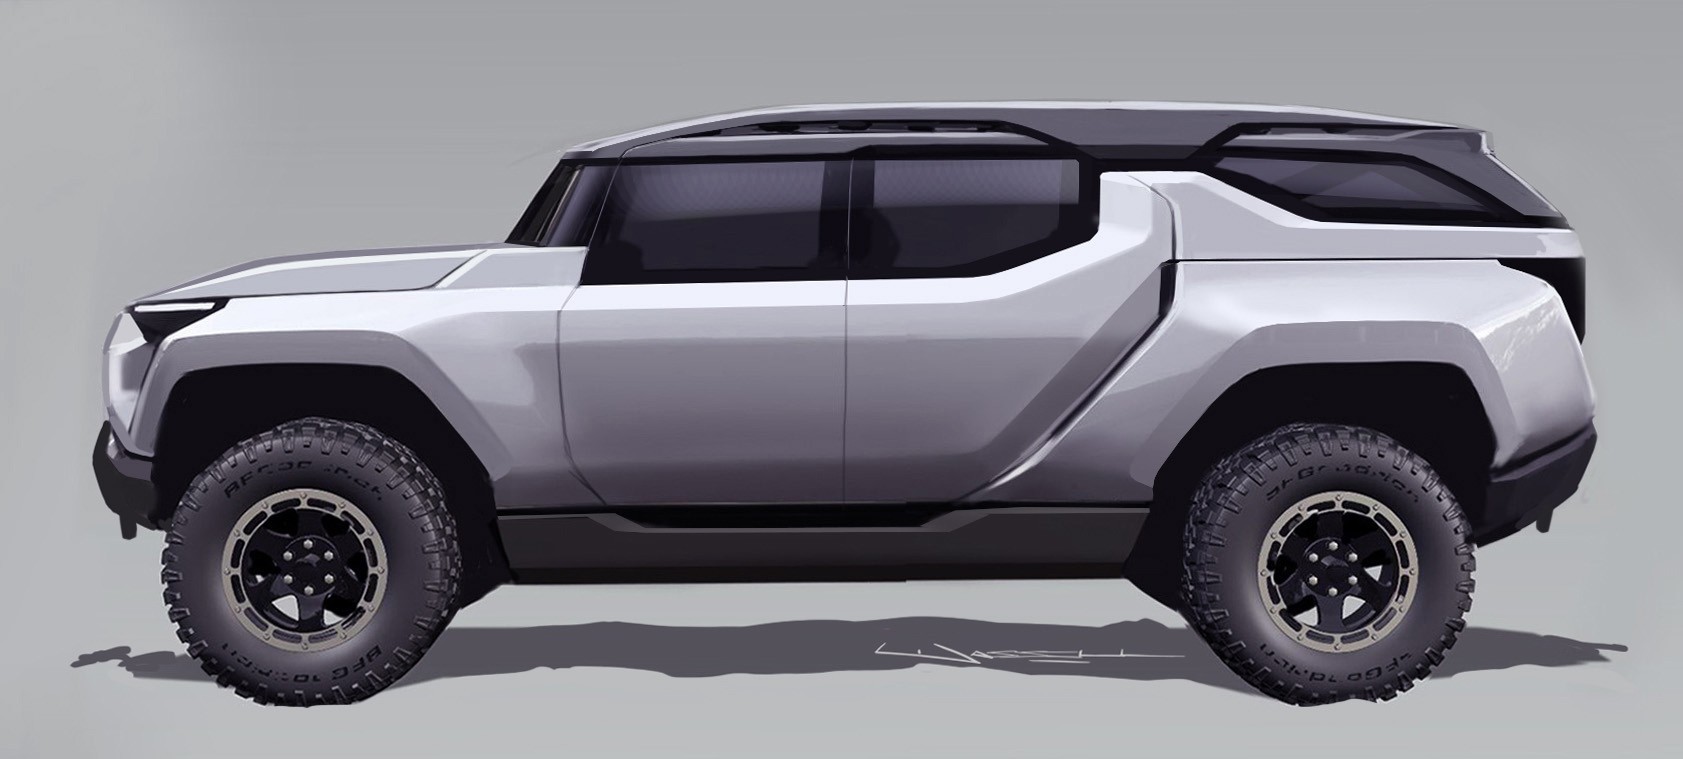 The Fast Lane Truck Offers Early HandsOn Look at the 2024 GMC Hummer EV SUV autoevolution